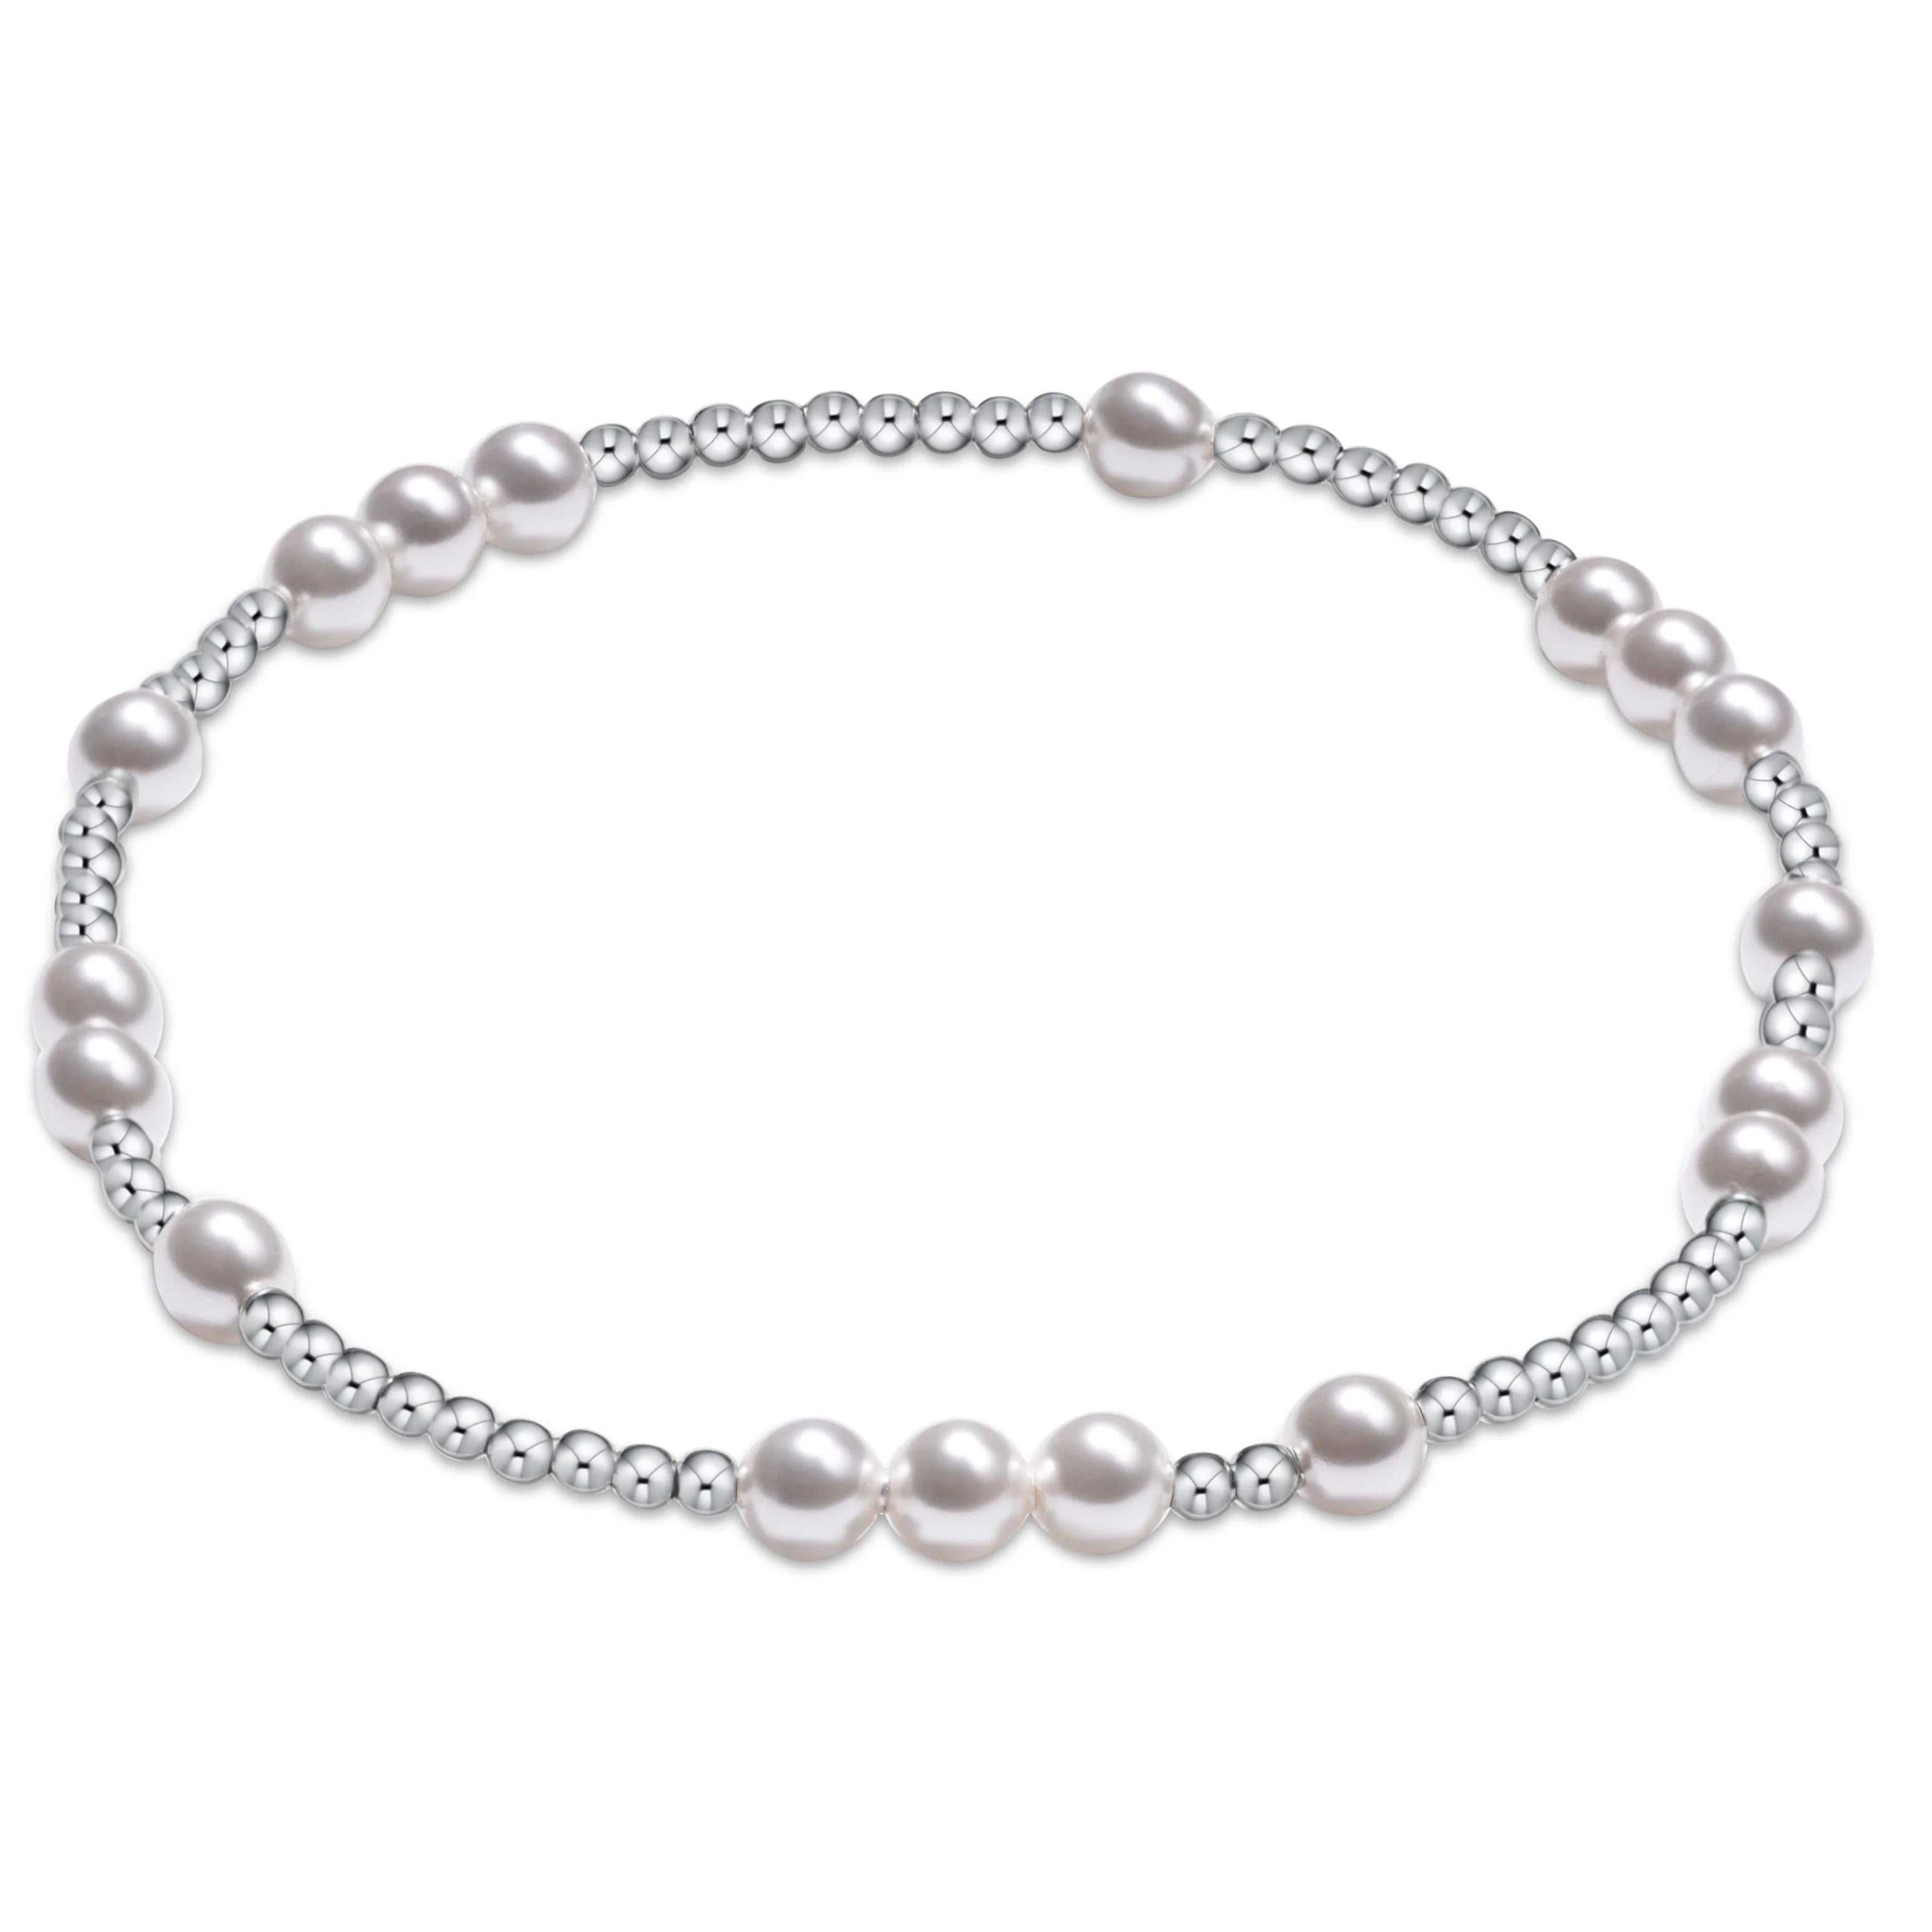 Silver Beads and Pearl Bracelet